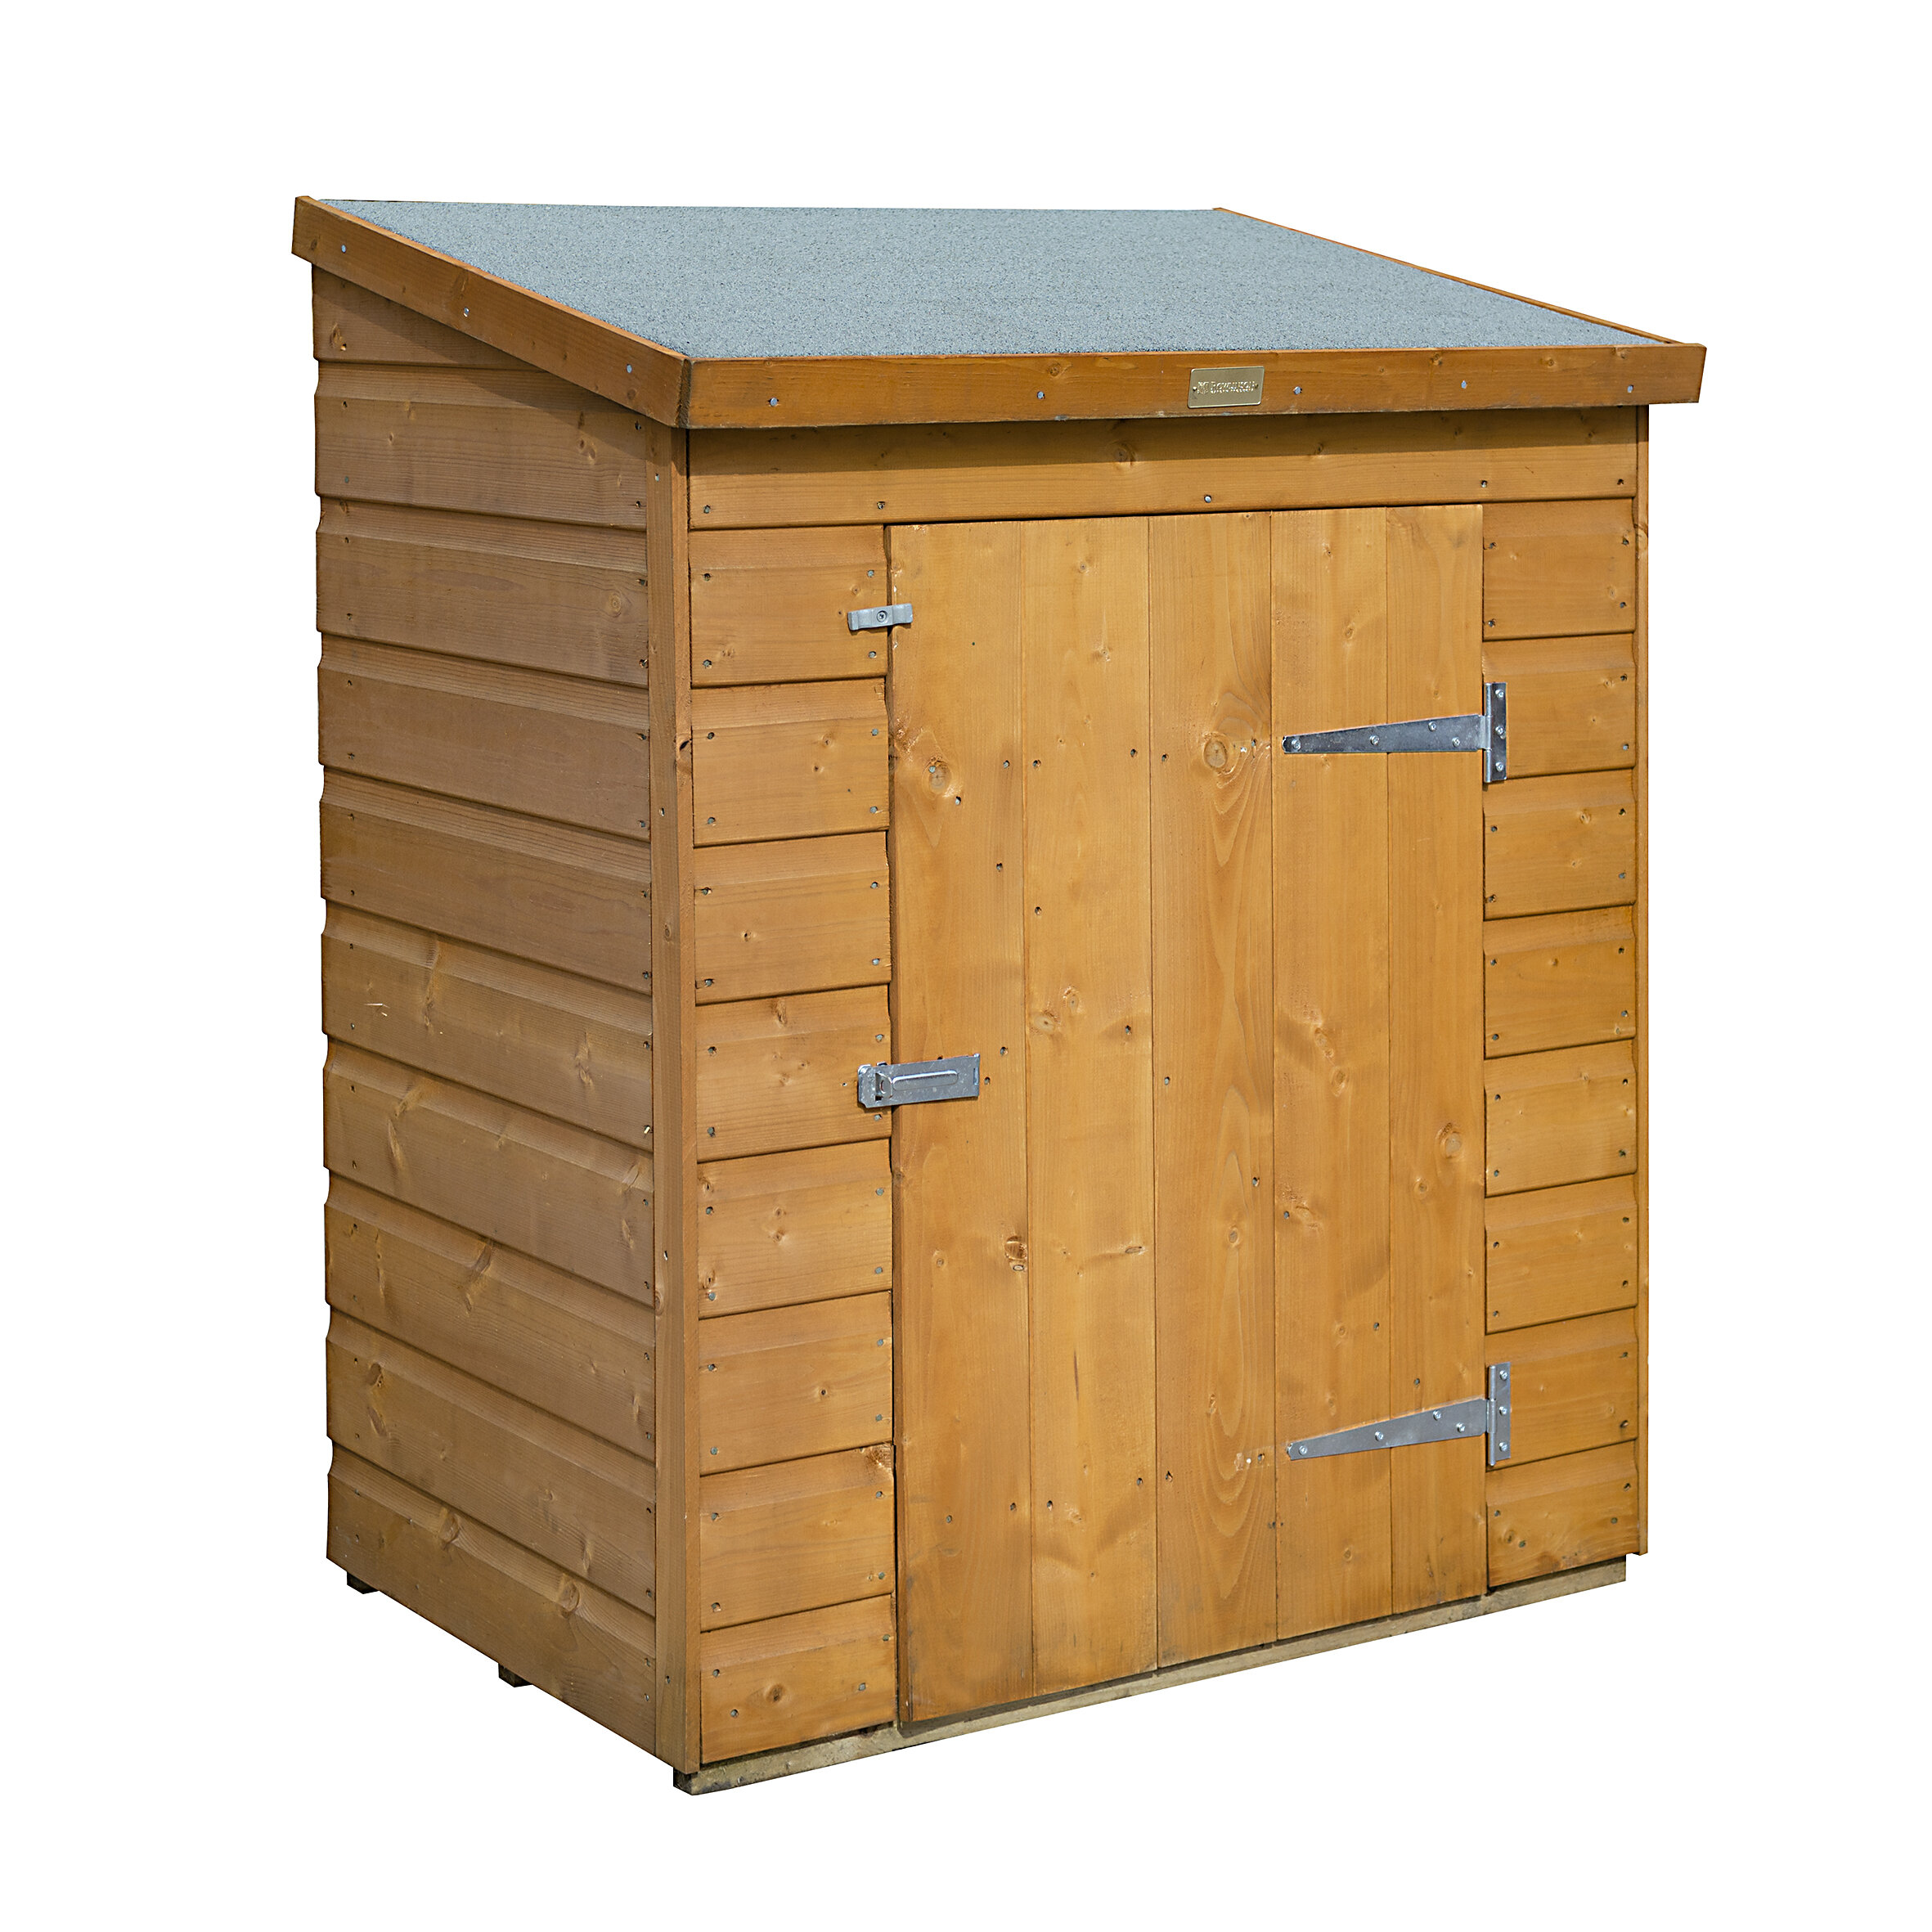 Wfx Utility 3 Ft W X 2 Ft D X 4 Ft H Wooden Tool Shed Reviews Wayfair Co Uk